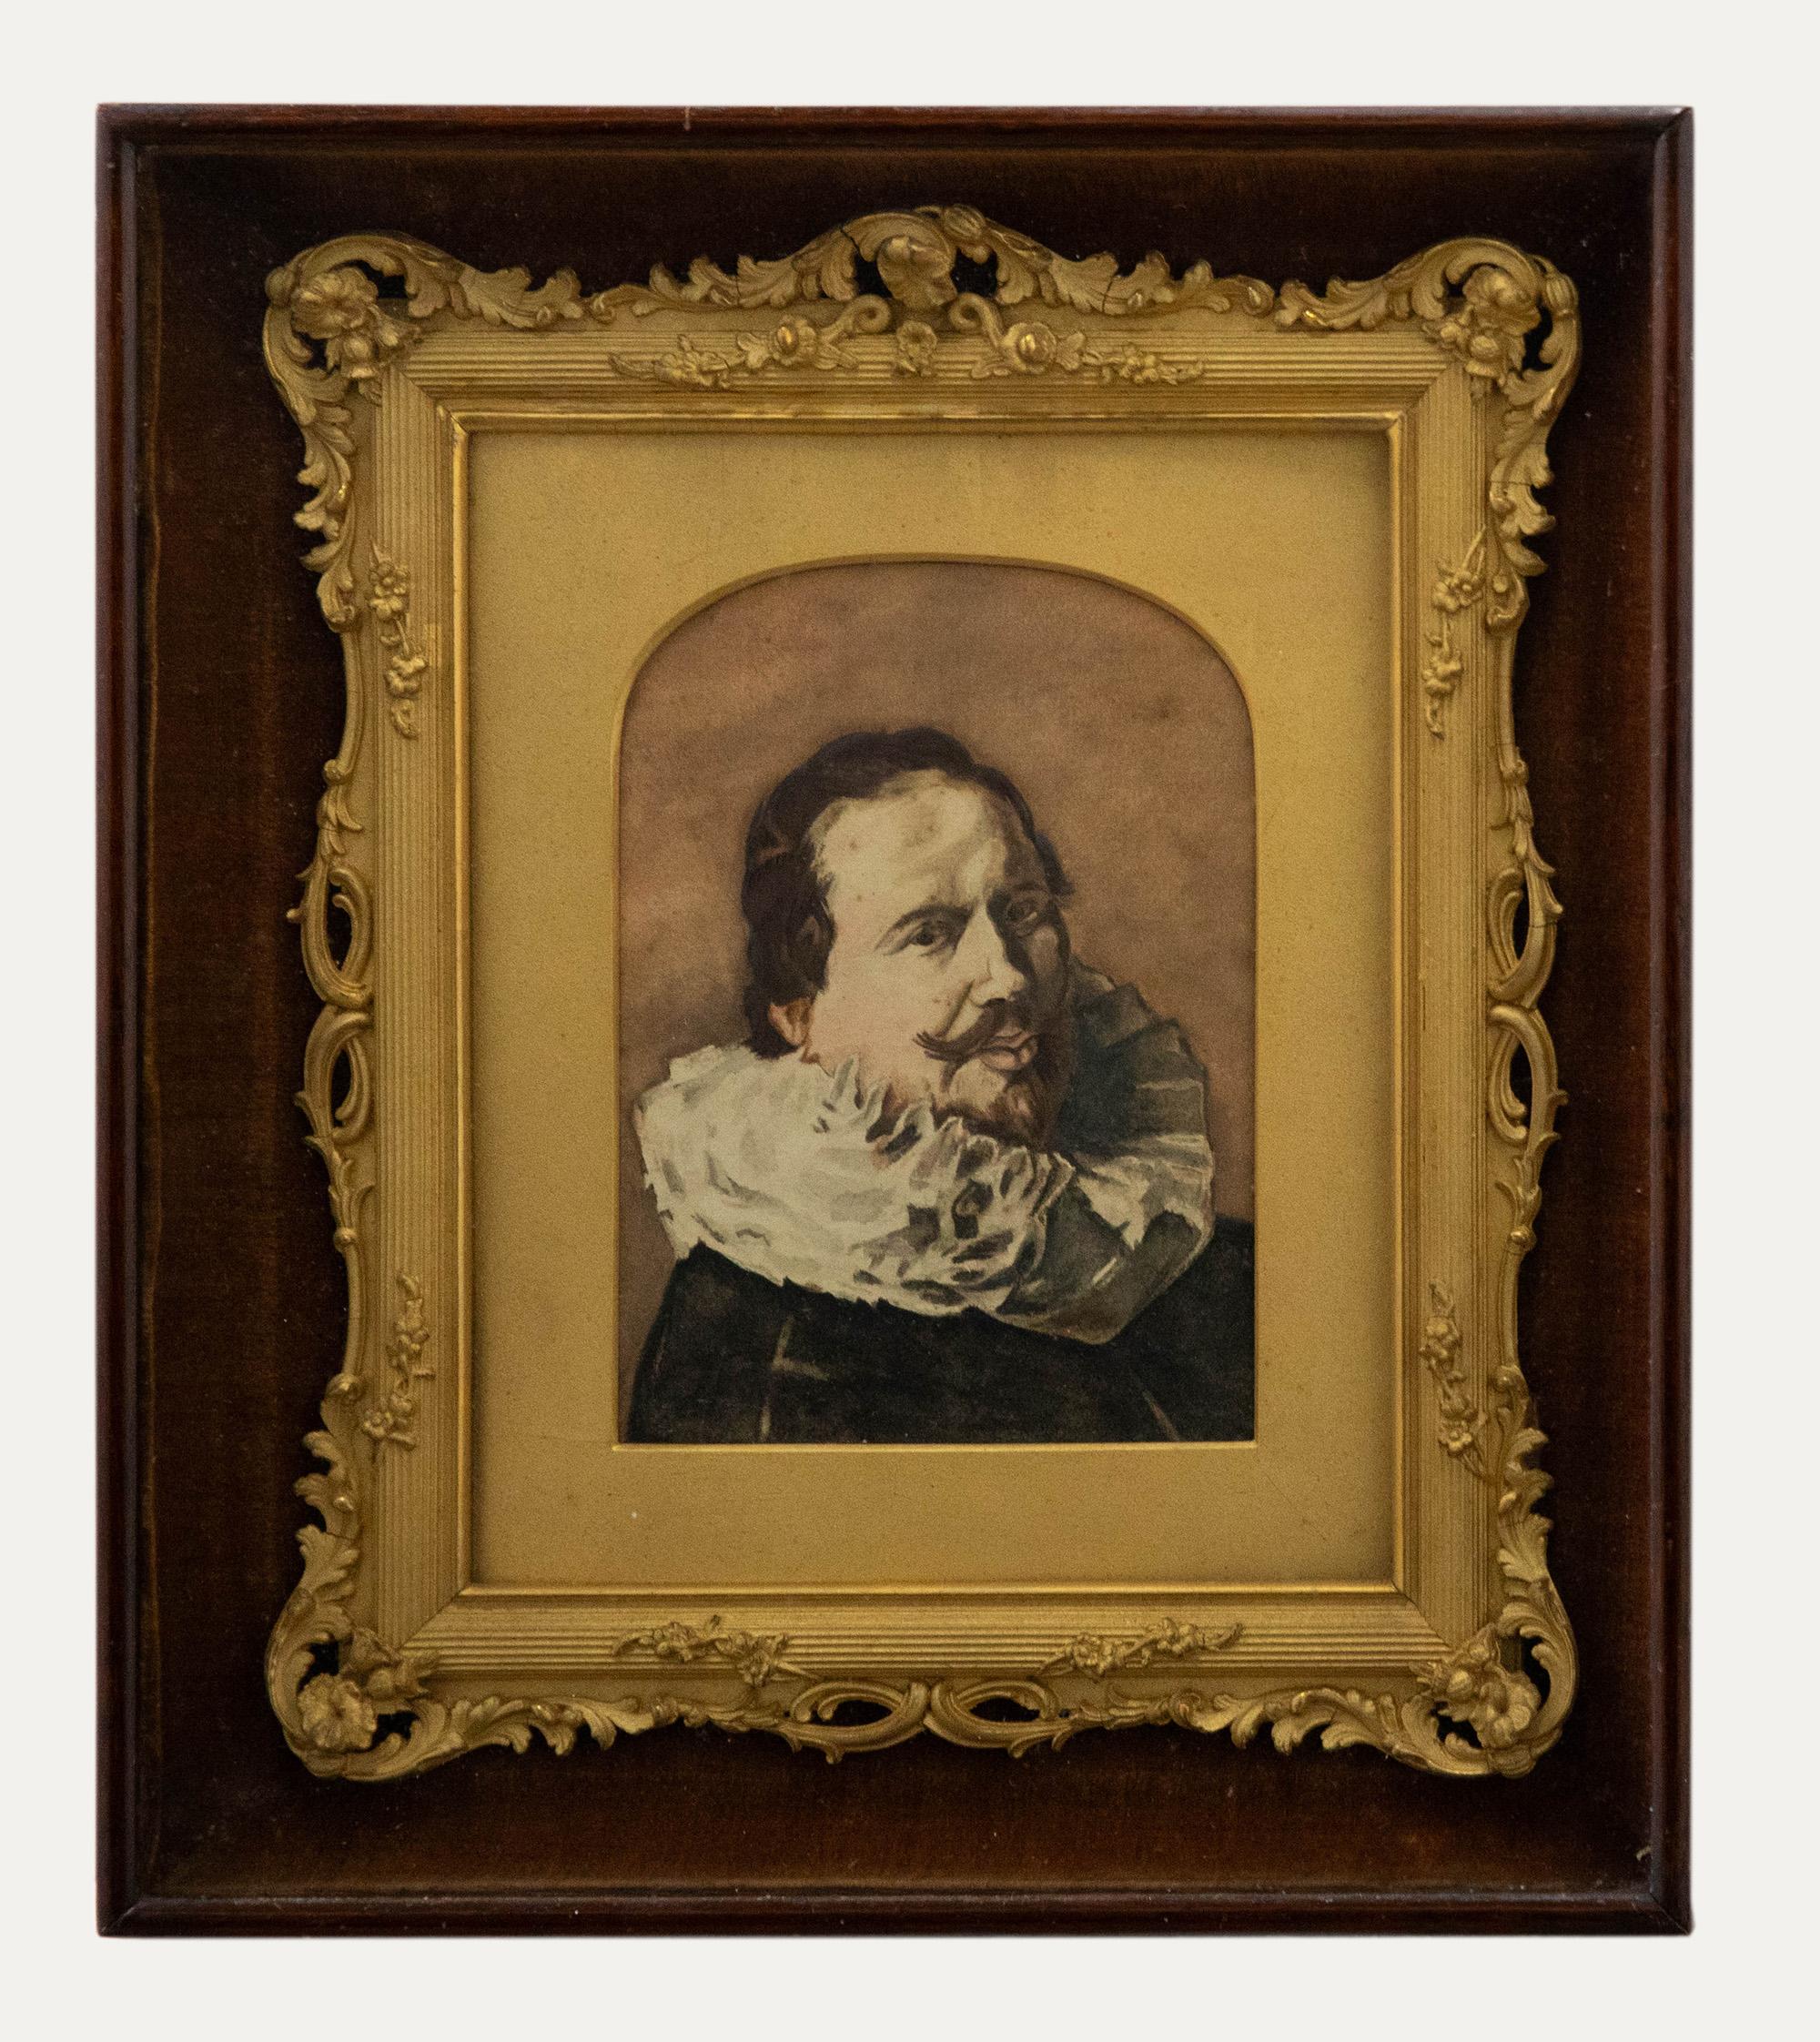 A charming watercolour self portrait. The artist seems to take inspiration from the self portraits of Rembrandt, creating an intimate composition where the viewer is confronted with the subject. Beautifully presented in an ornate gilt frame with